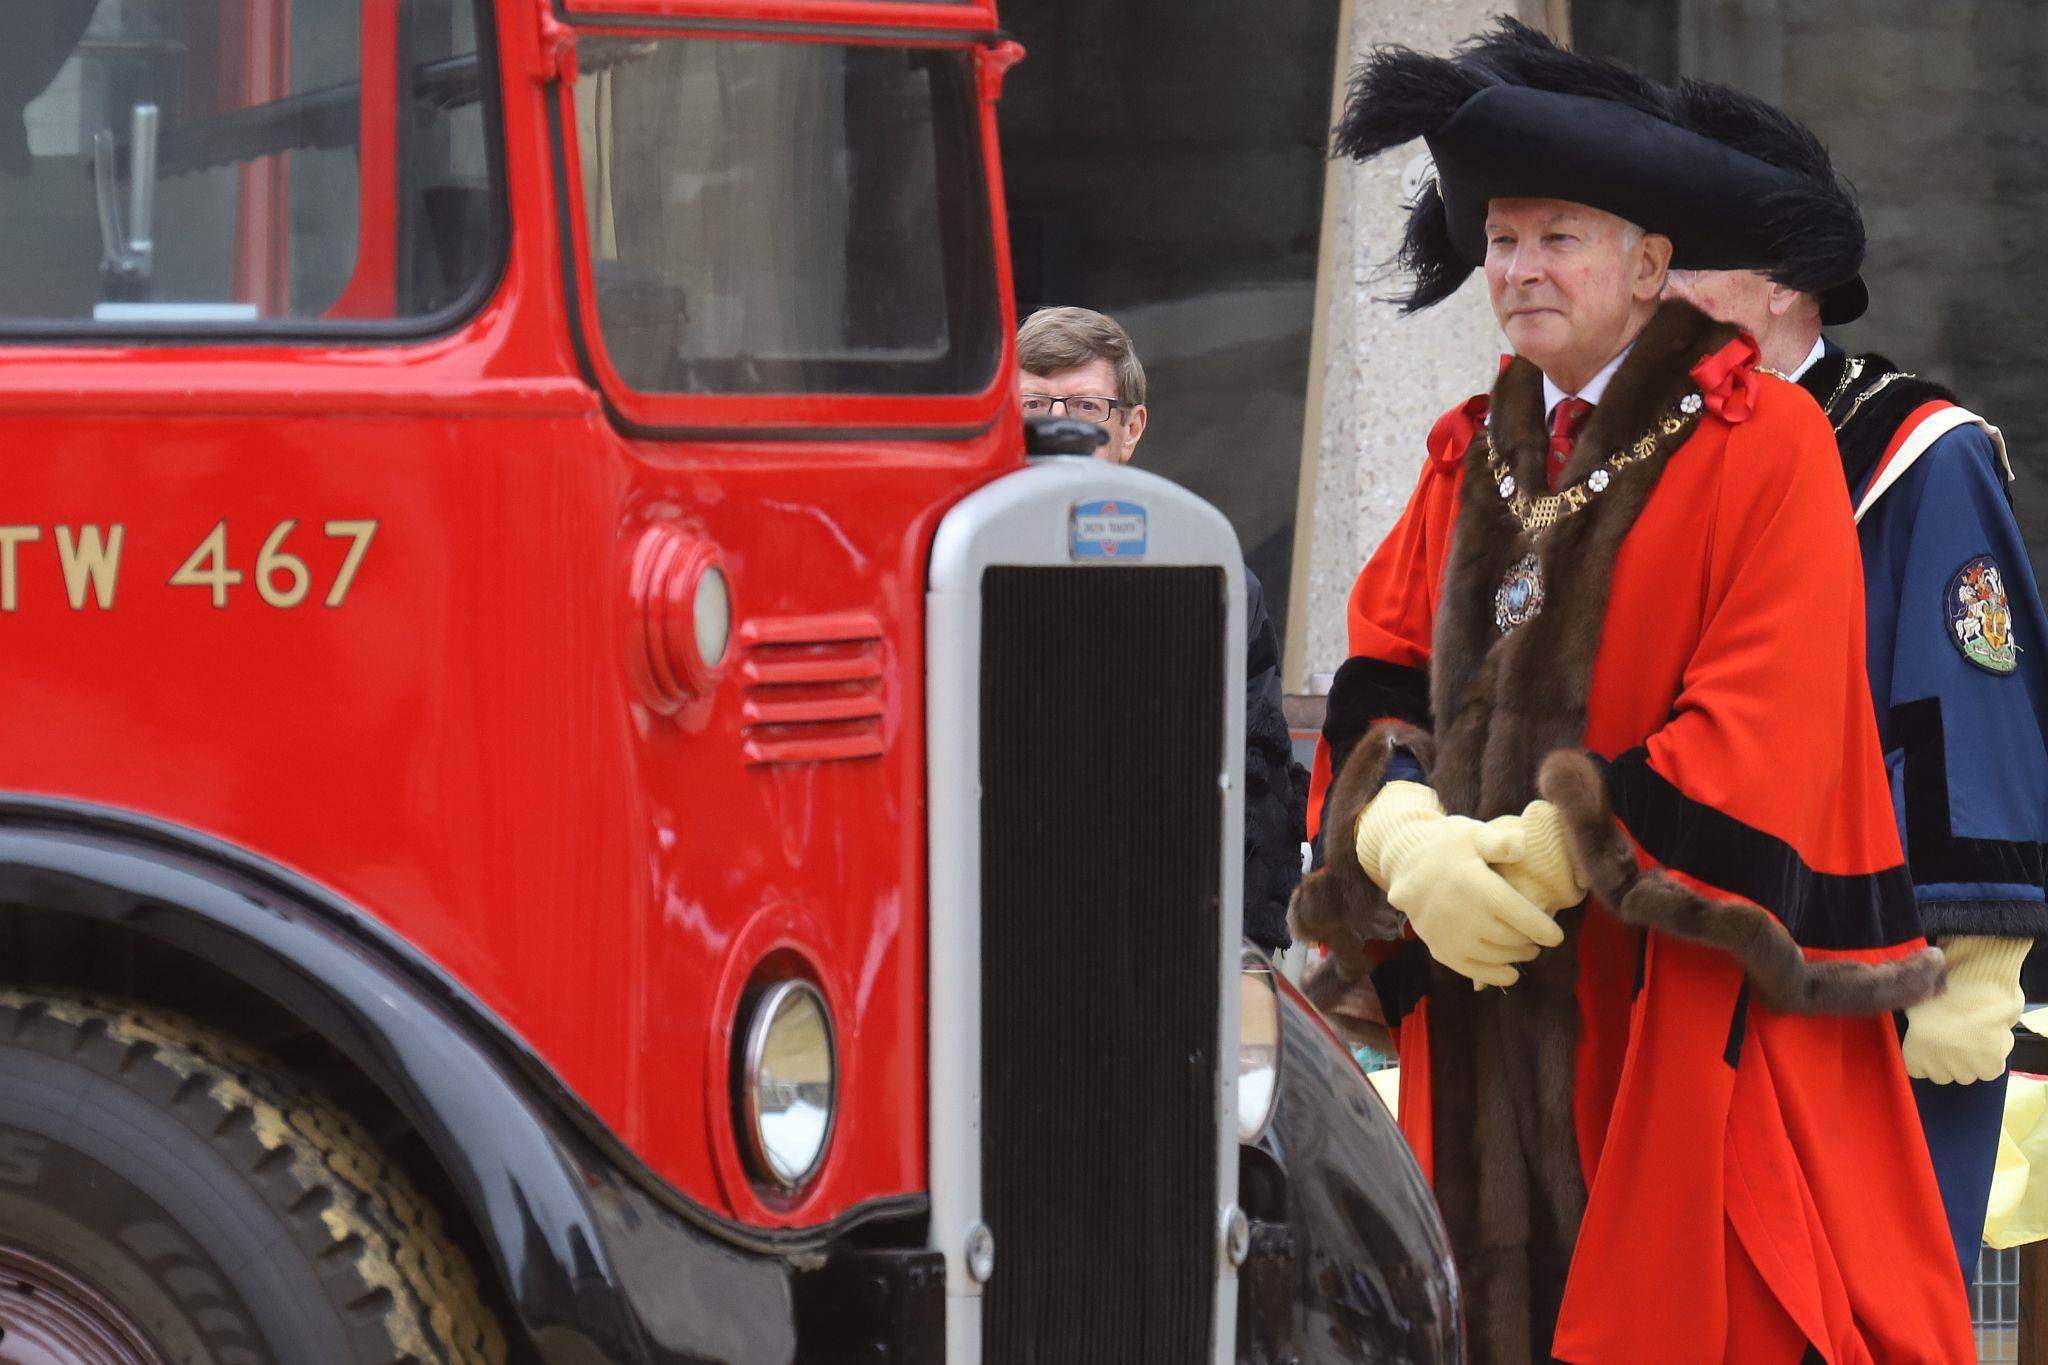 Lord Mayor (Nicholas Lyons) admires an exhibit. Leyland Titan 1950 LLU957. City of London 2023 Cart Marking in Guildhall Yard on 22-Jul-2023. Hosted by the Worshipful Company of Carmen with the Lord Mayor of the City of London in attendance. Wooden plates on the vehicles are branded with hot irons to allow them to ply for trade in the Square Mile. Another of the City Livery Company's annual ceremonies.